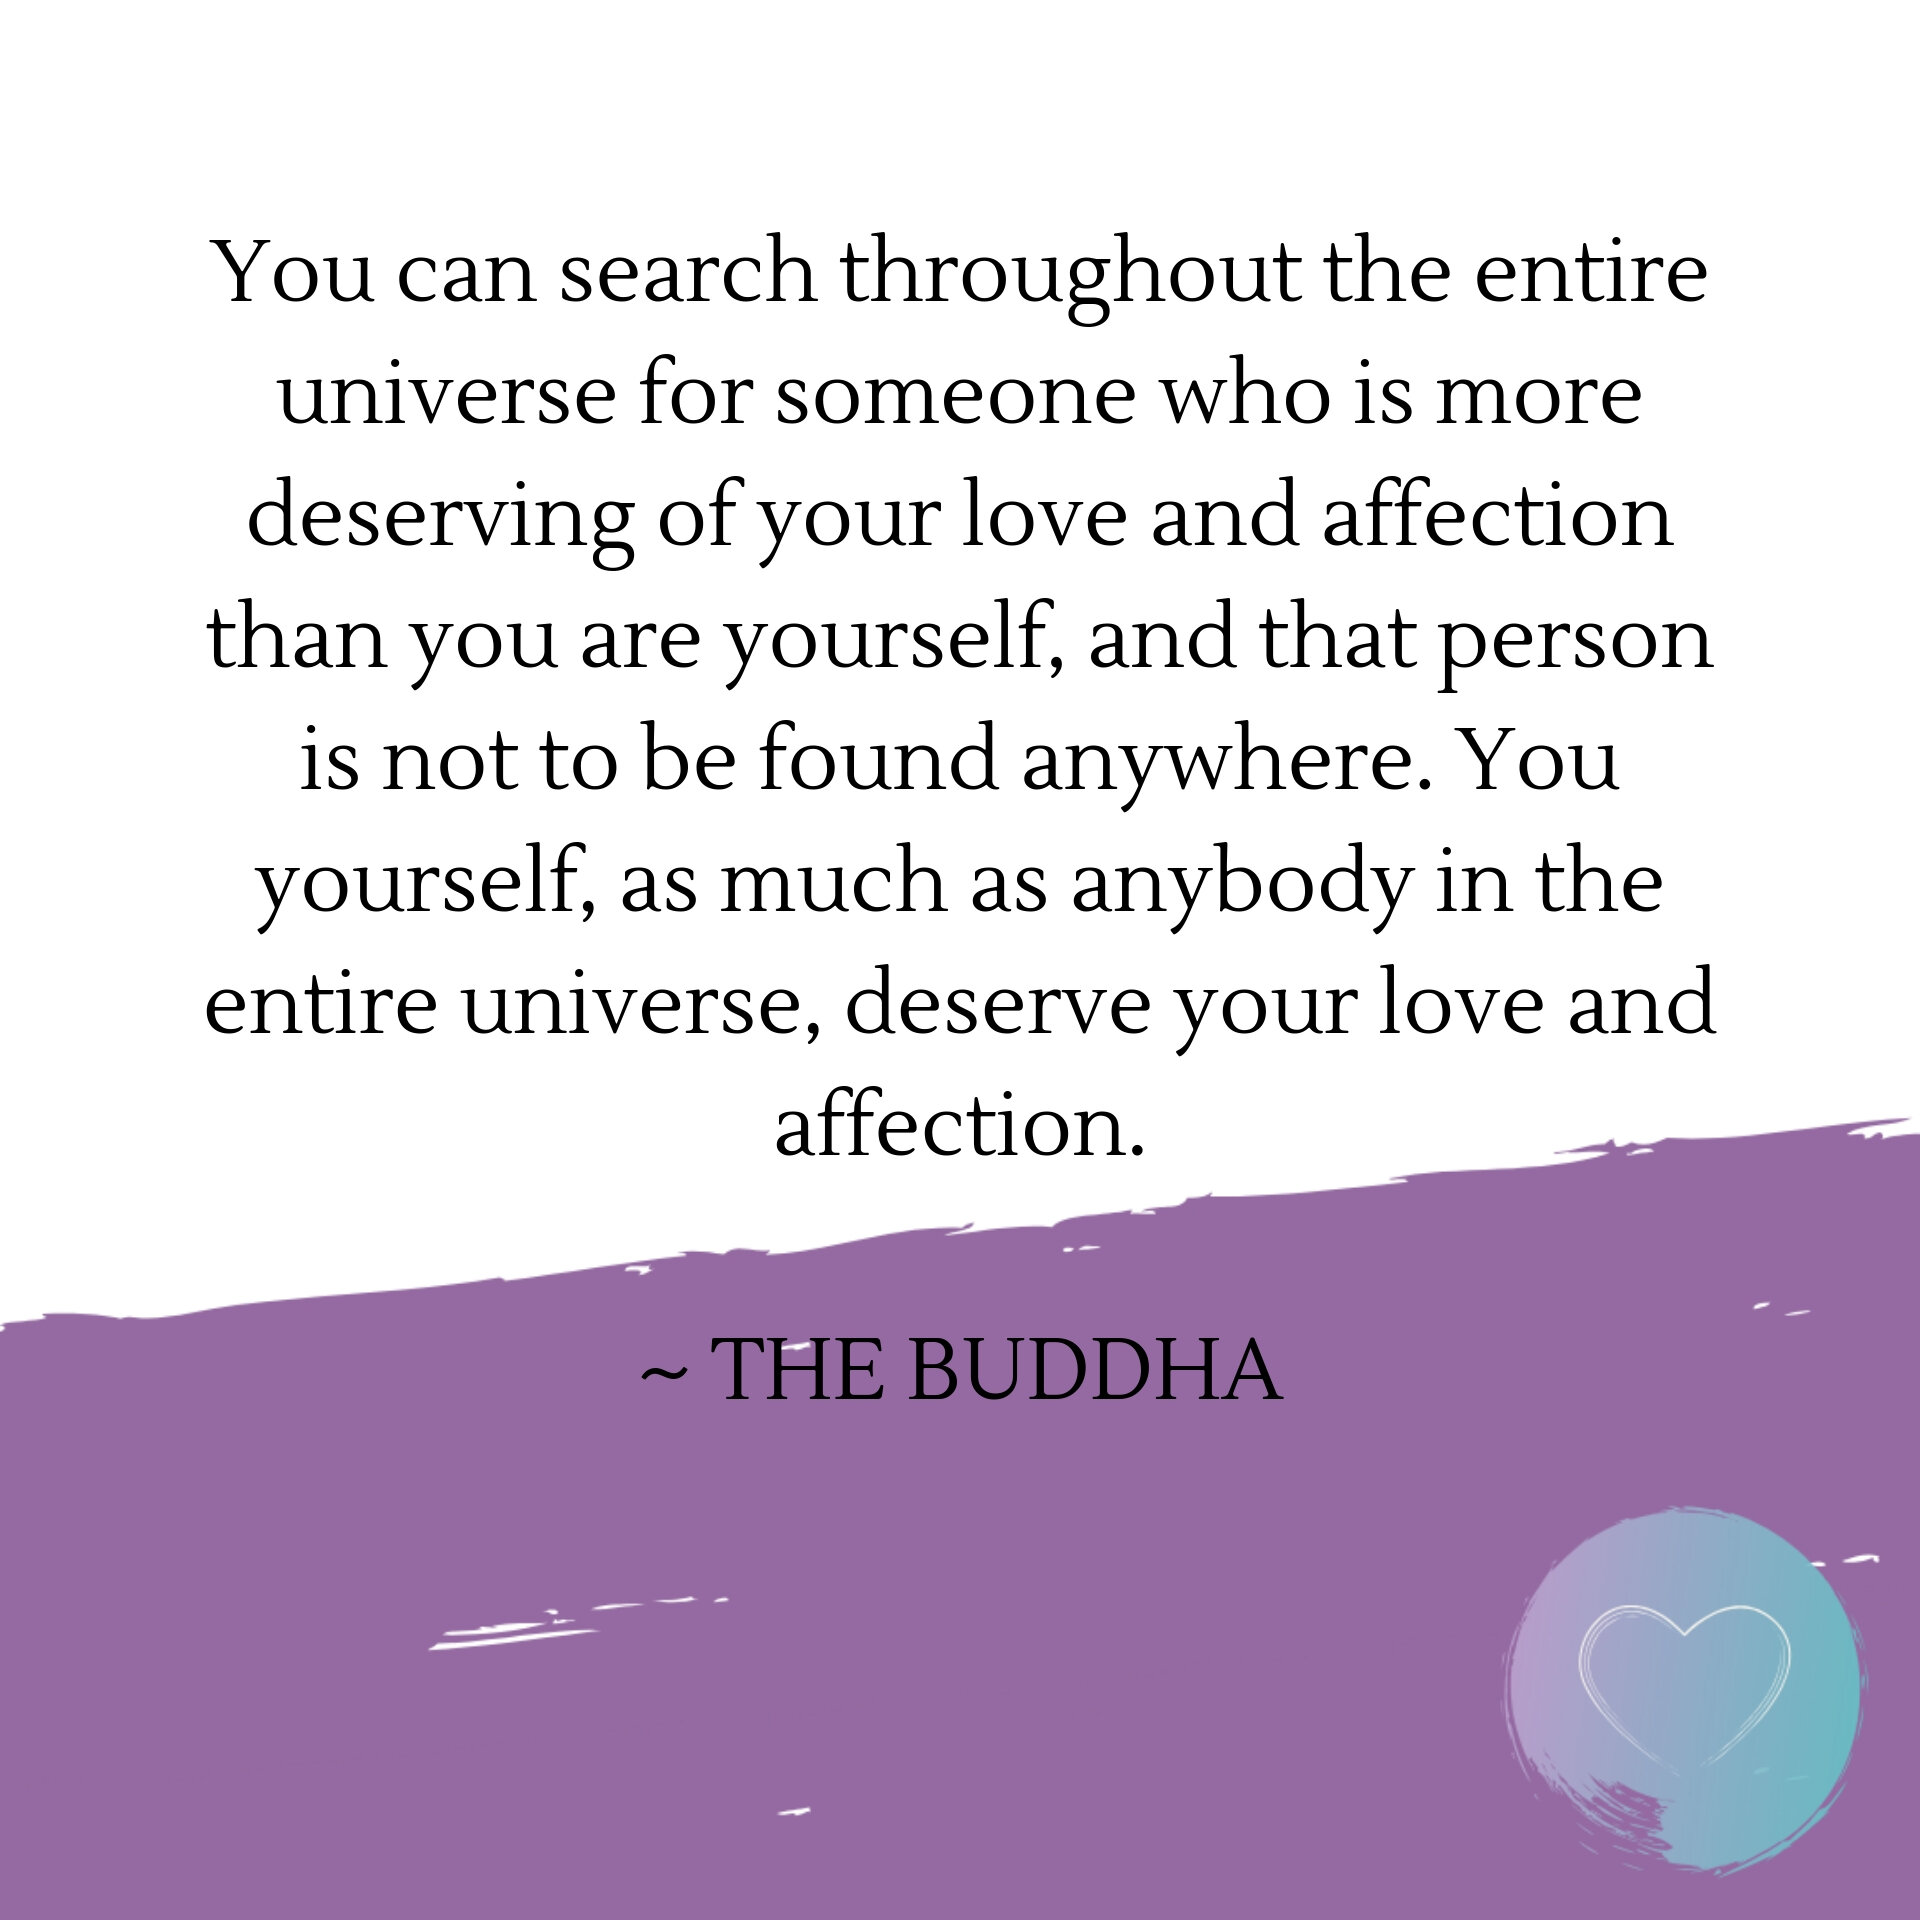 You can search throughout the entire universe for someone who is more deserving of your love and affection than you are yourself, and that person is not to be found anywhere. You yourself, as much as anybody in the e.jpg